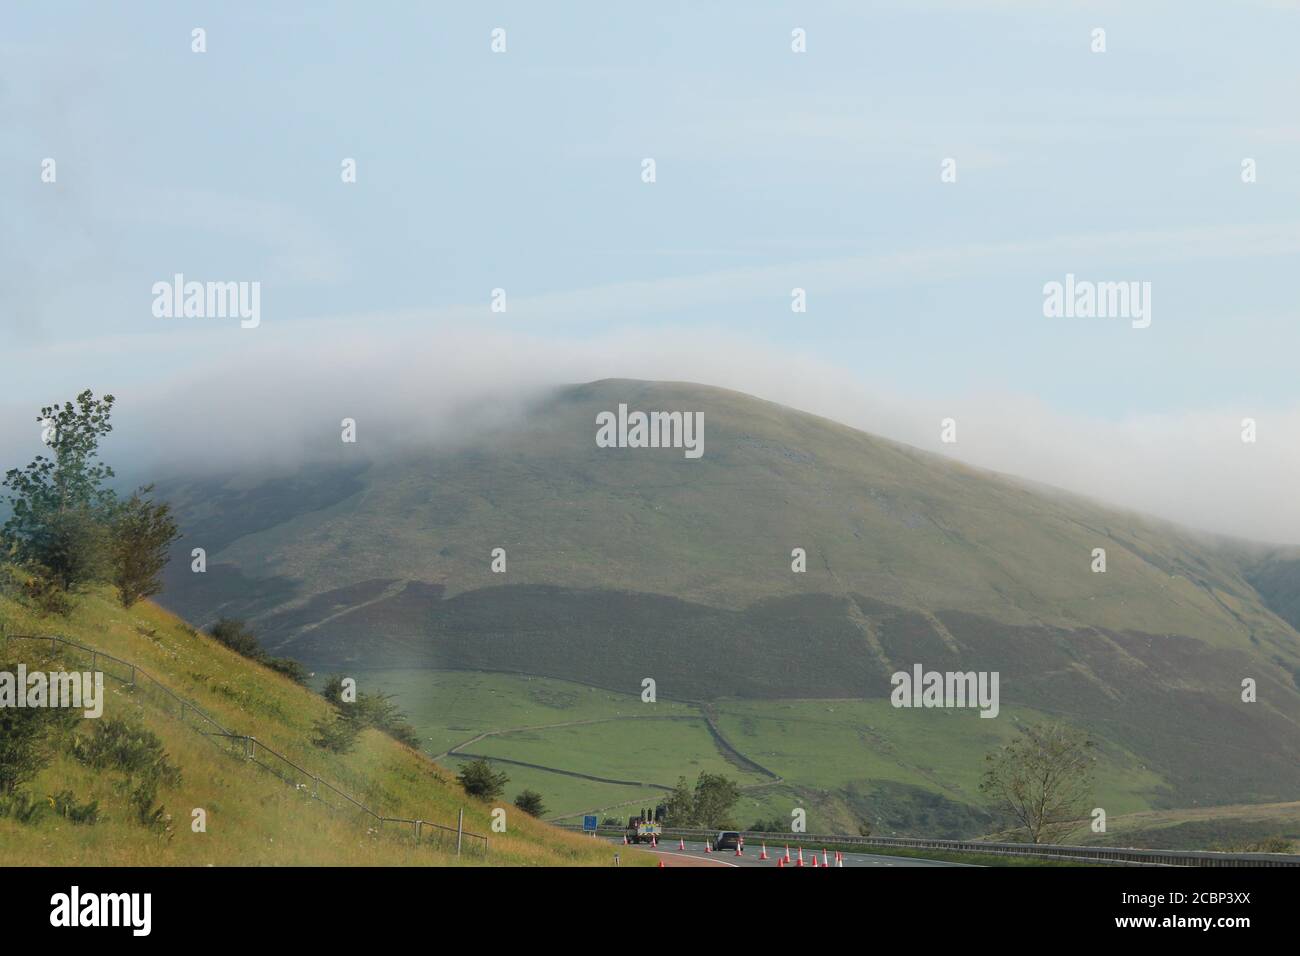 clouds covering the top of hills with copy space Stock Photo